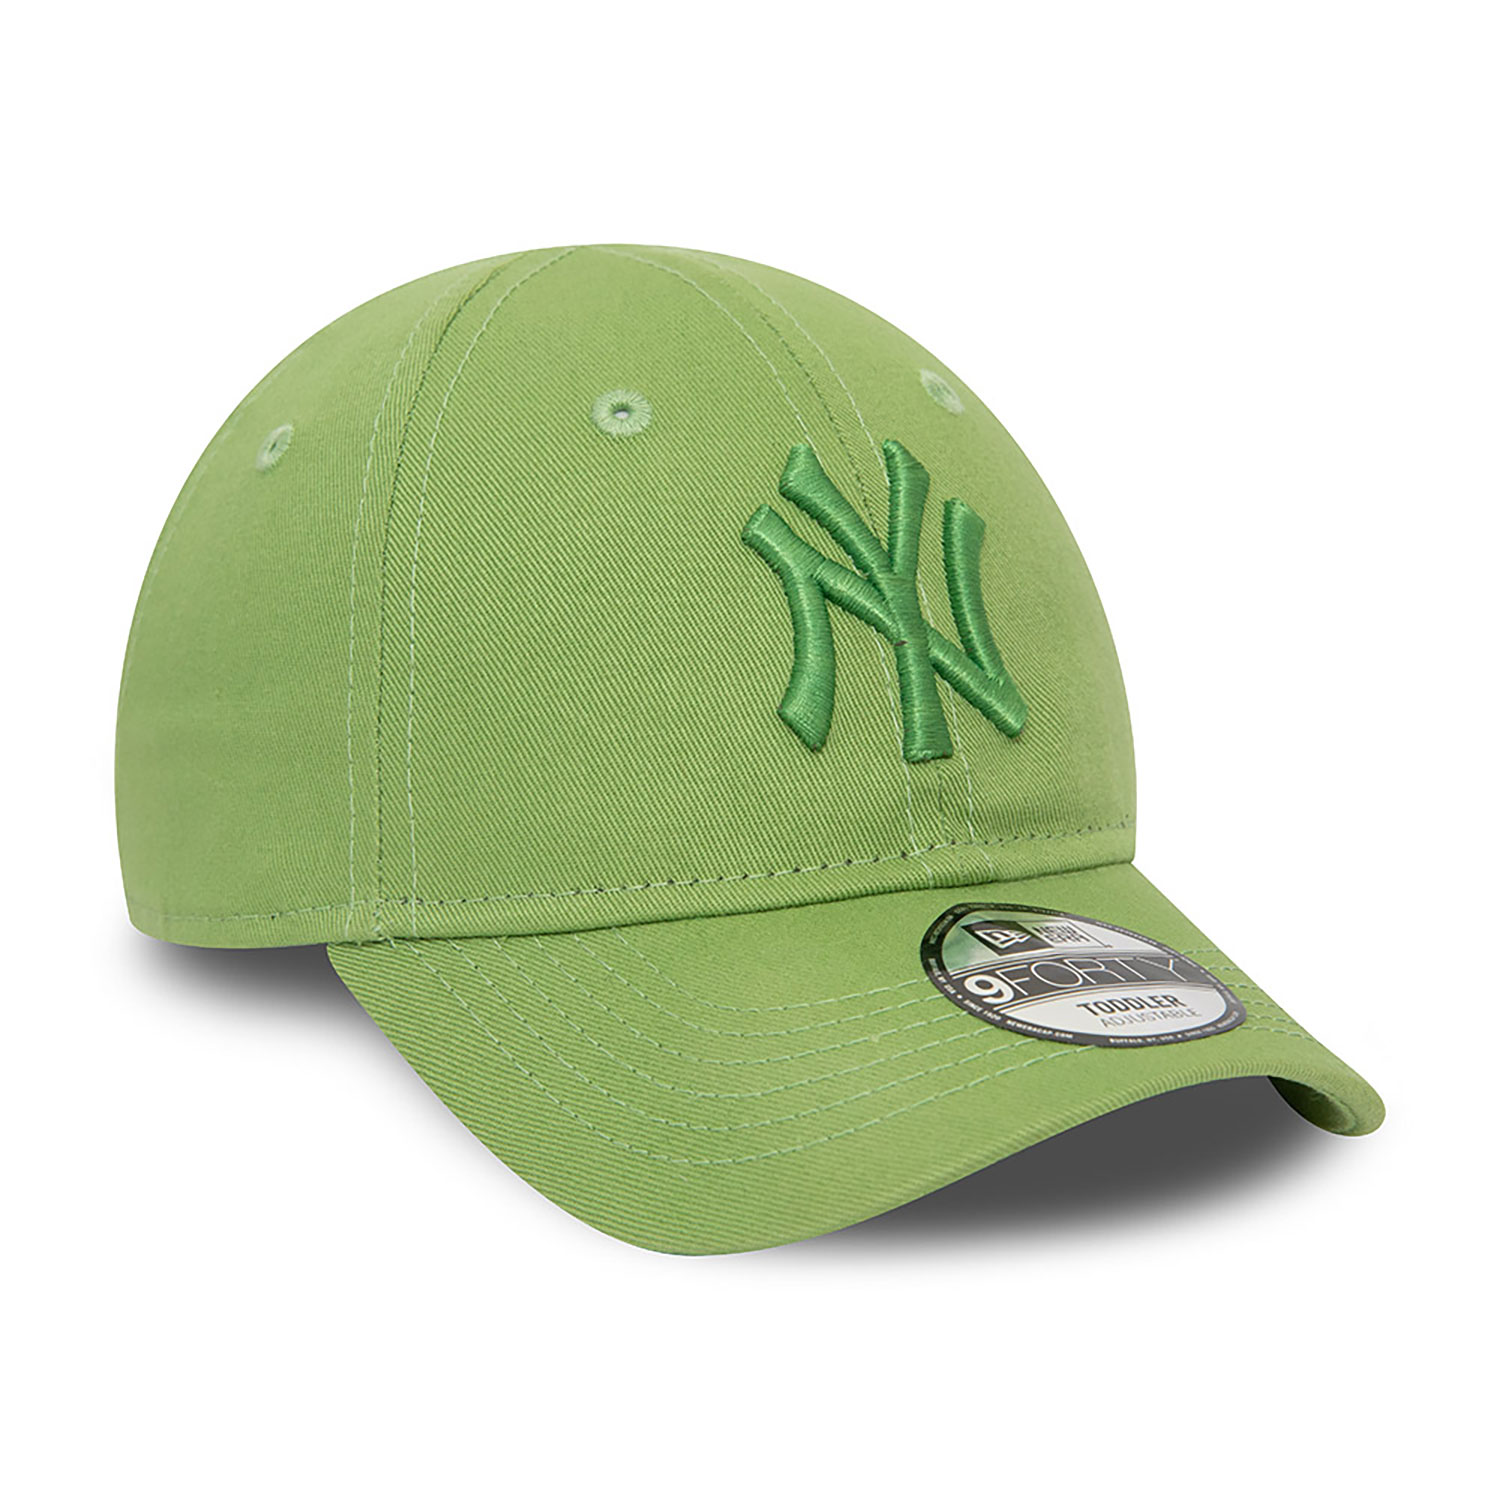 New York Yankees Toddler League Essential Green 9FORTY Adjustable Cap